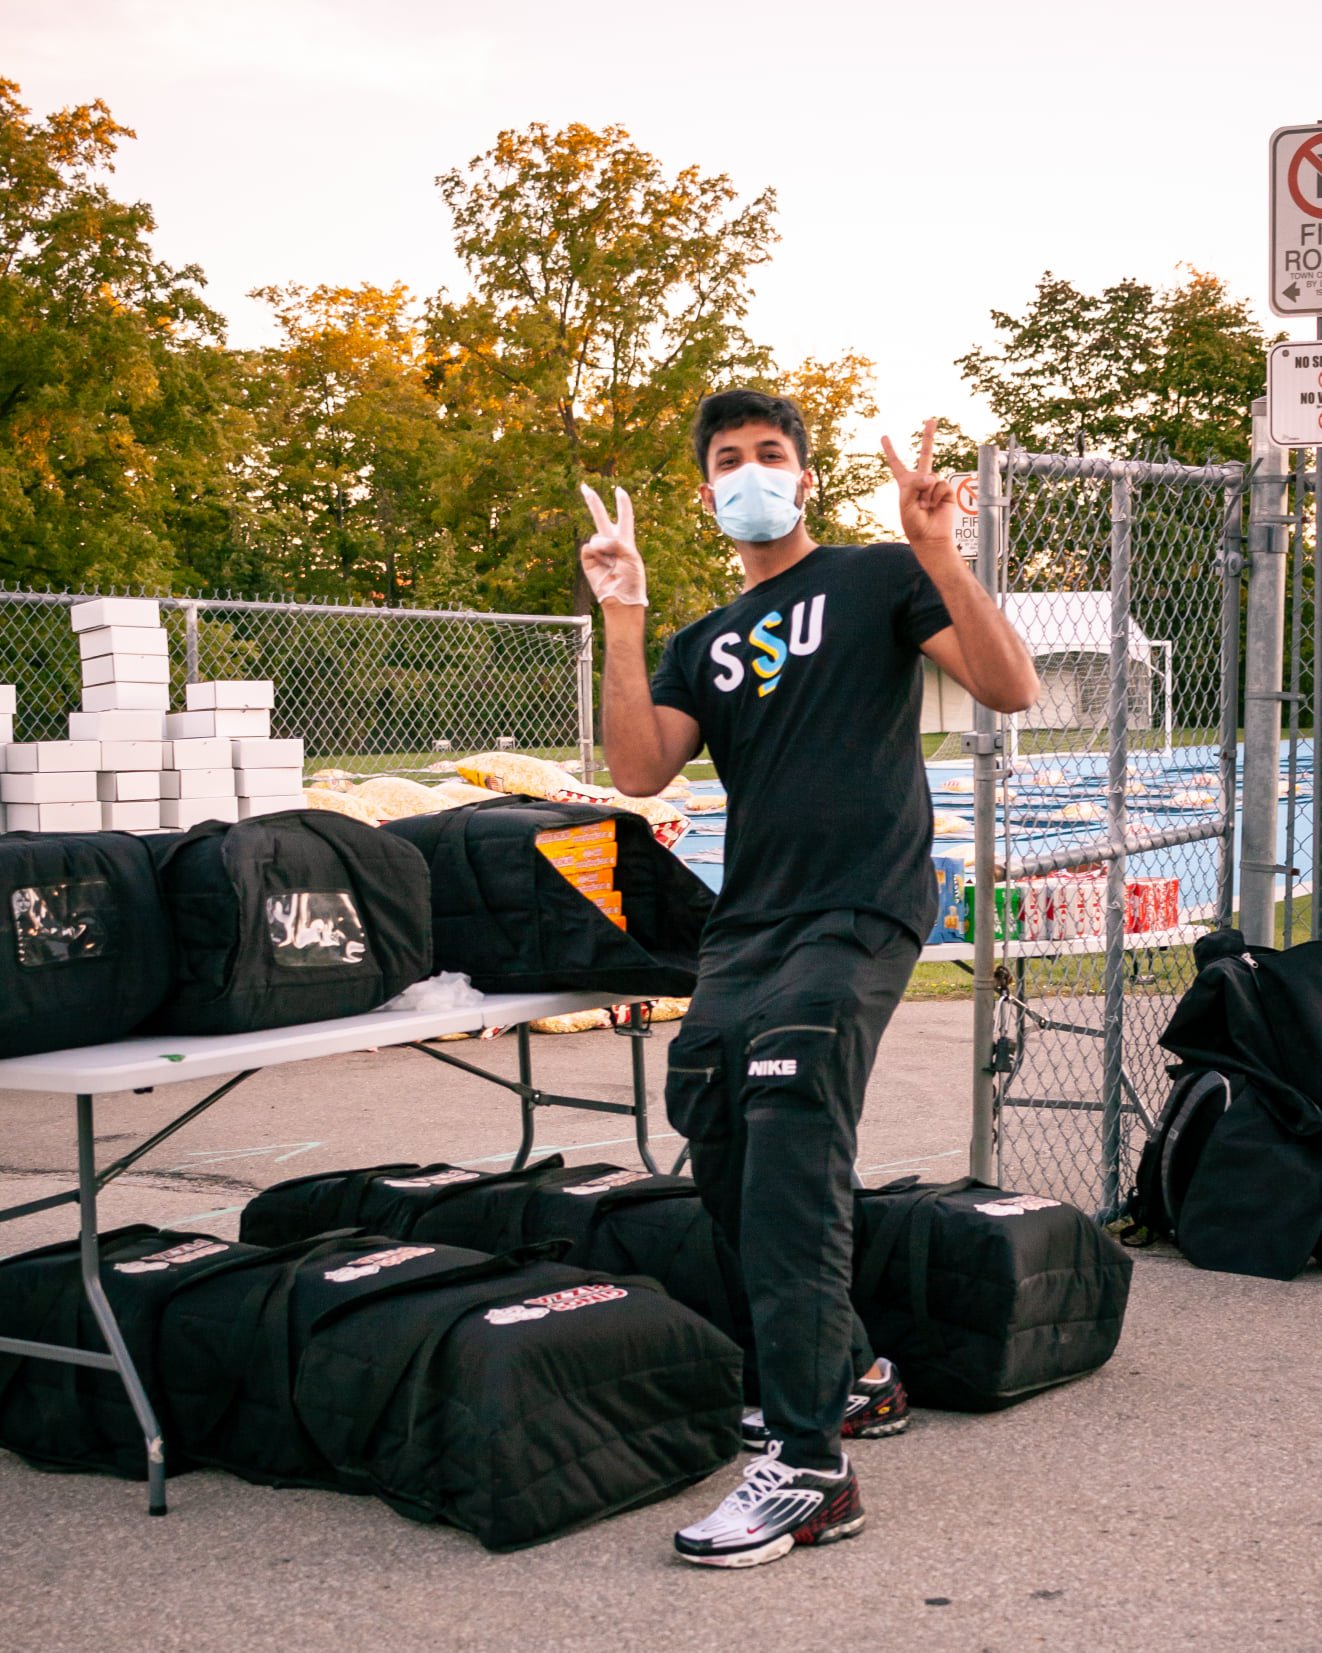  Student Life Coordinator standing at a table with food and pop cans in the distance, wearing a black SSU t-shirt, black pants and mask, giving a peace sign. 